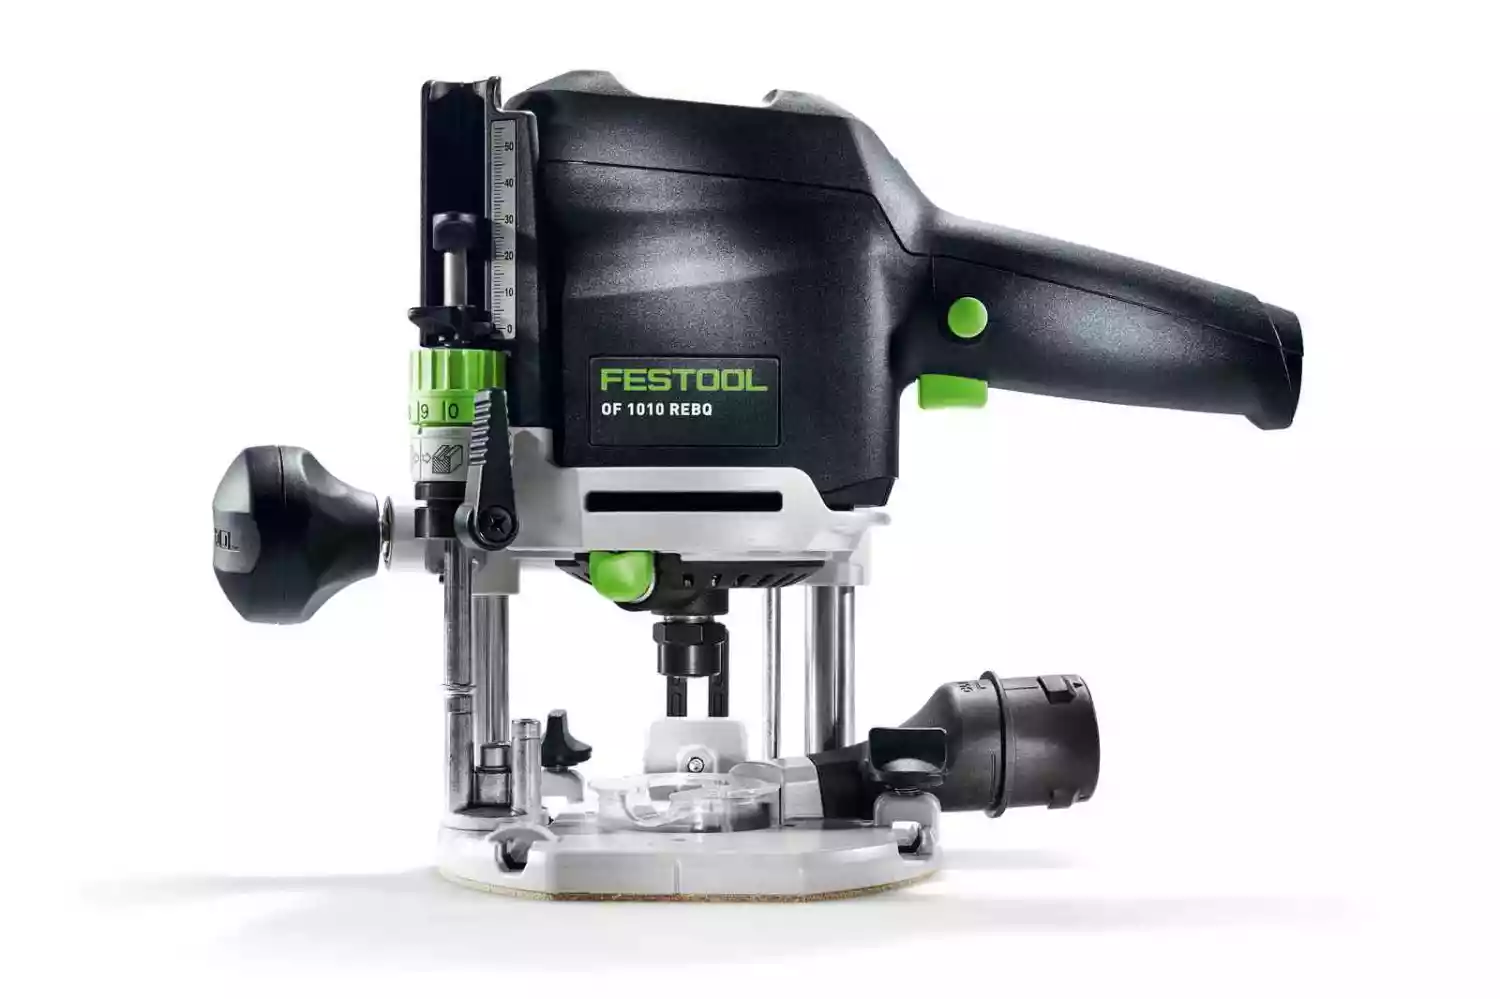 Festool OF 1010 REBQ-Set+Box Bovenfrees in systainer incl. geleiderail 1010W - 55 mm-image